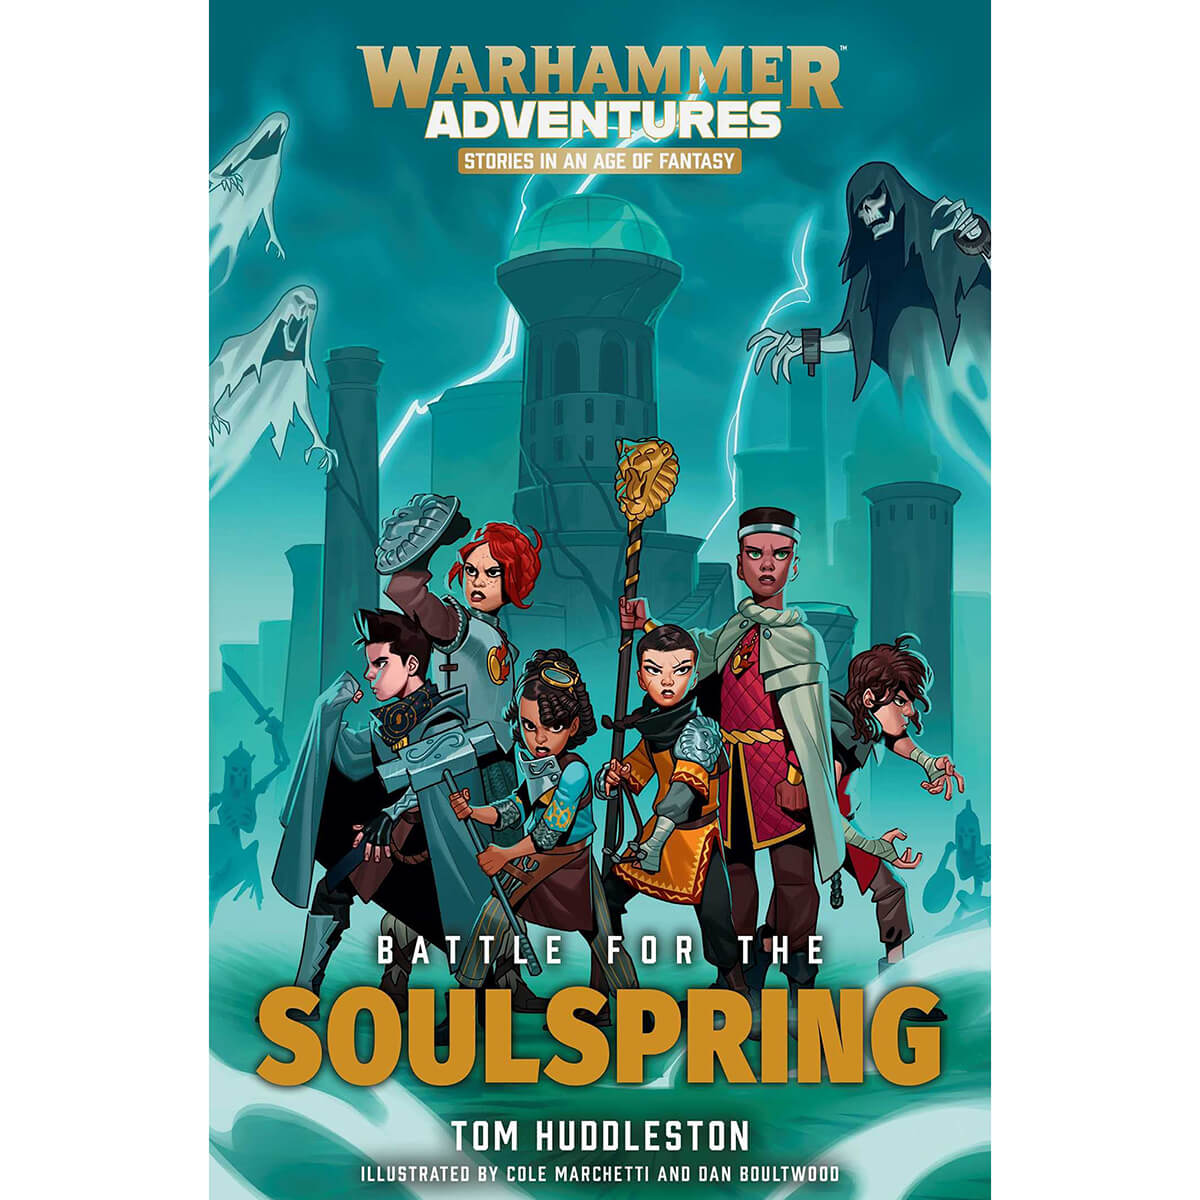 Warhammer Adventures: Stories in an Age of Fantasy - Battle for the Soulspring: Book 6 Paperback